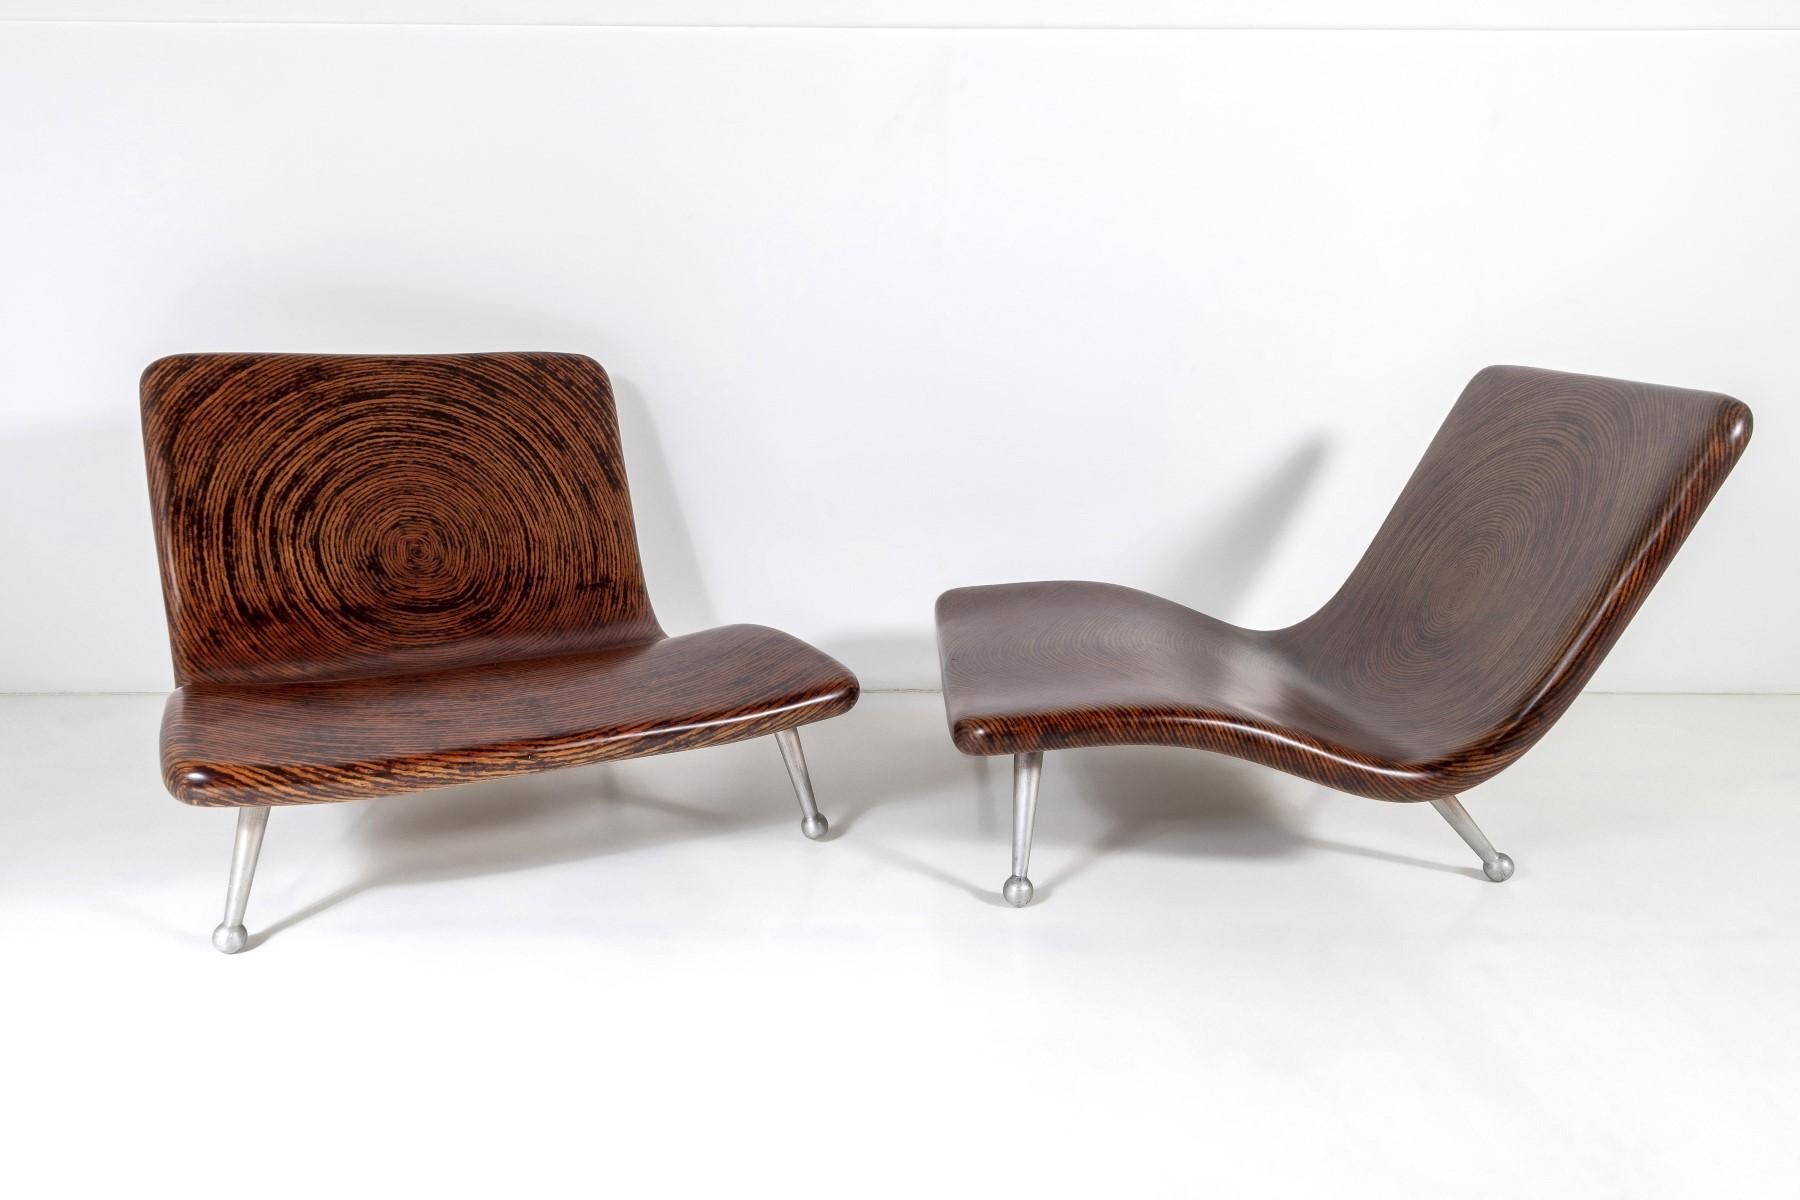 Organic Modern Designer Clayton Tugonon Coconut Lounge Chair and Table Set  By Snug For Sale